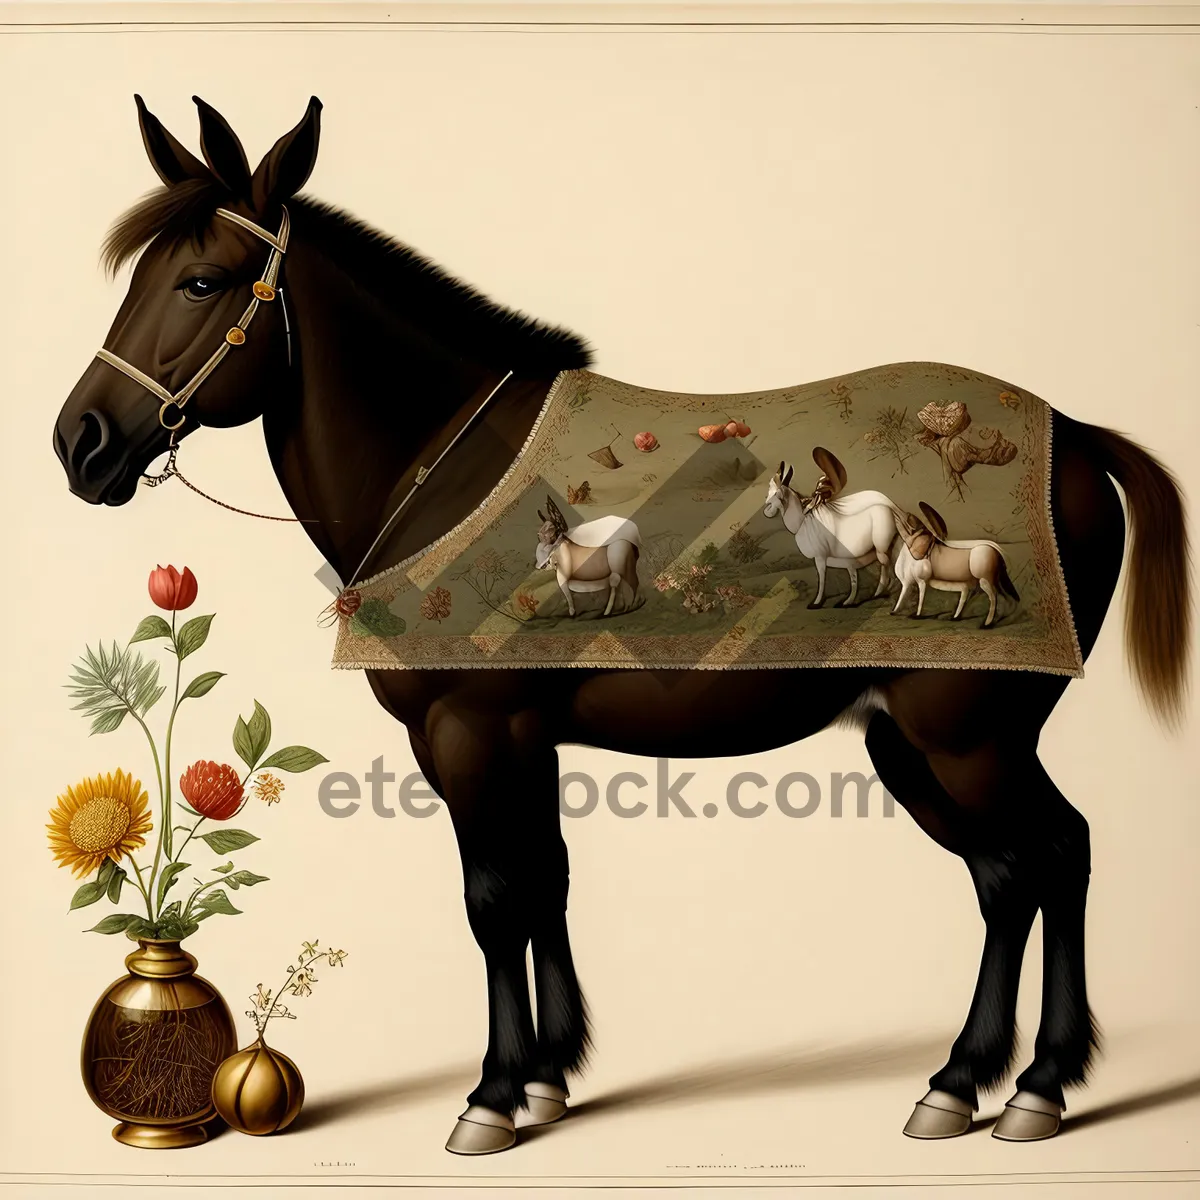 Picture of Equine Equestrian Gear for Stylish Stallions and Mares.